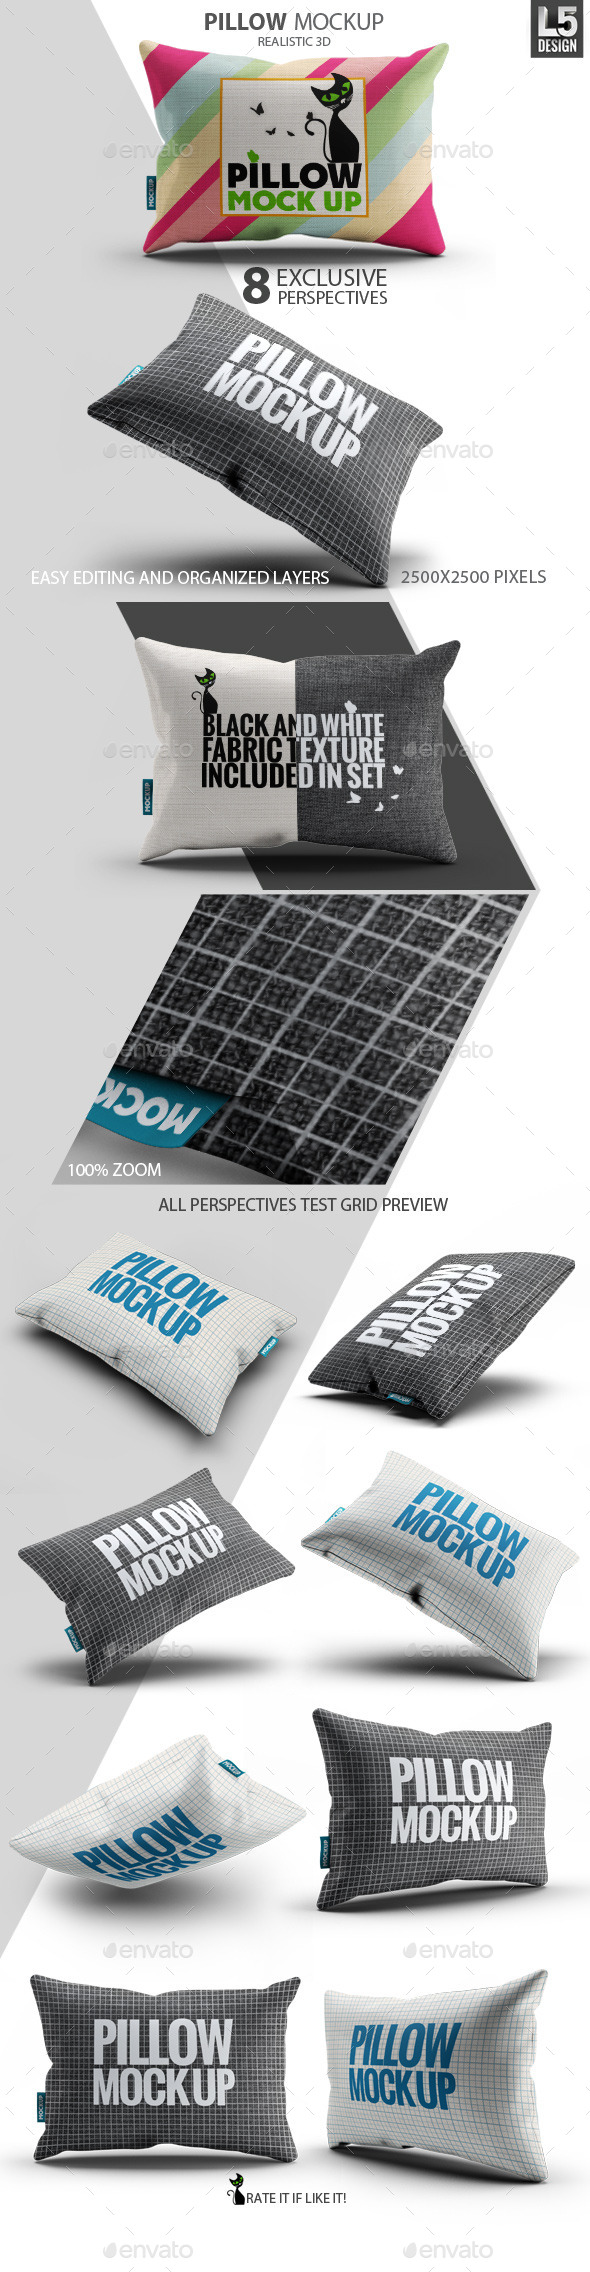 Fabric Pillow Mock-Up by L5Design | GraphicRiver